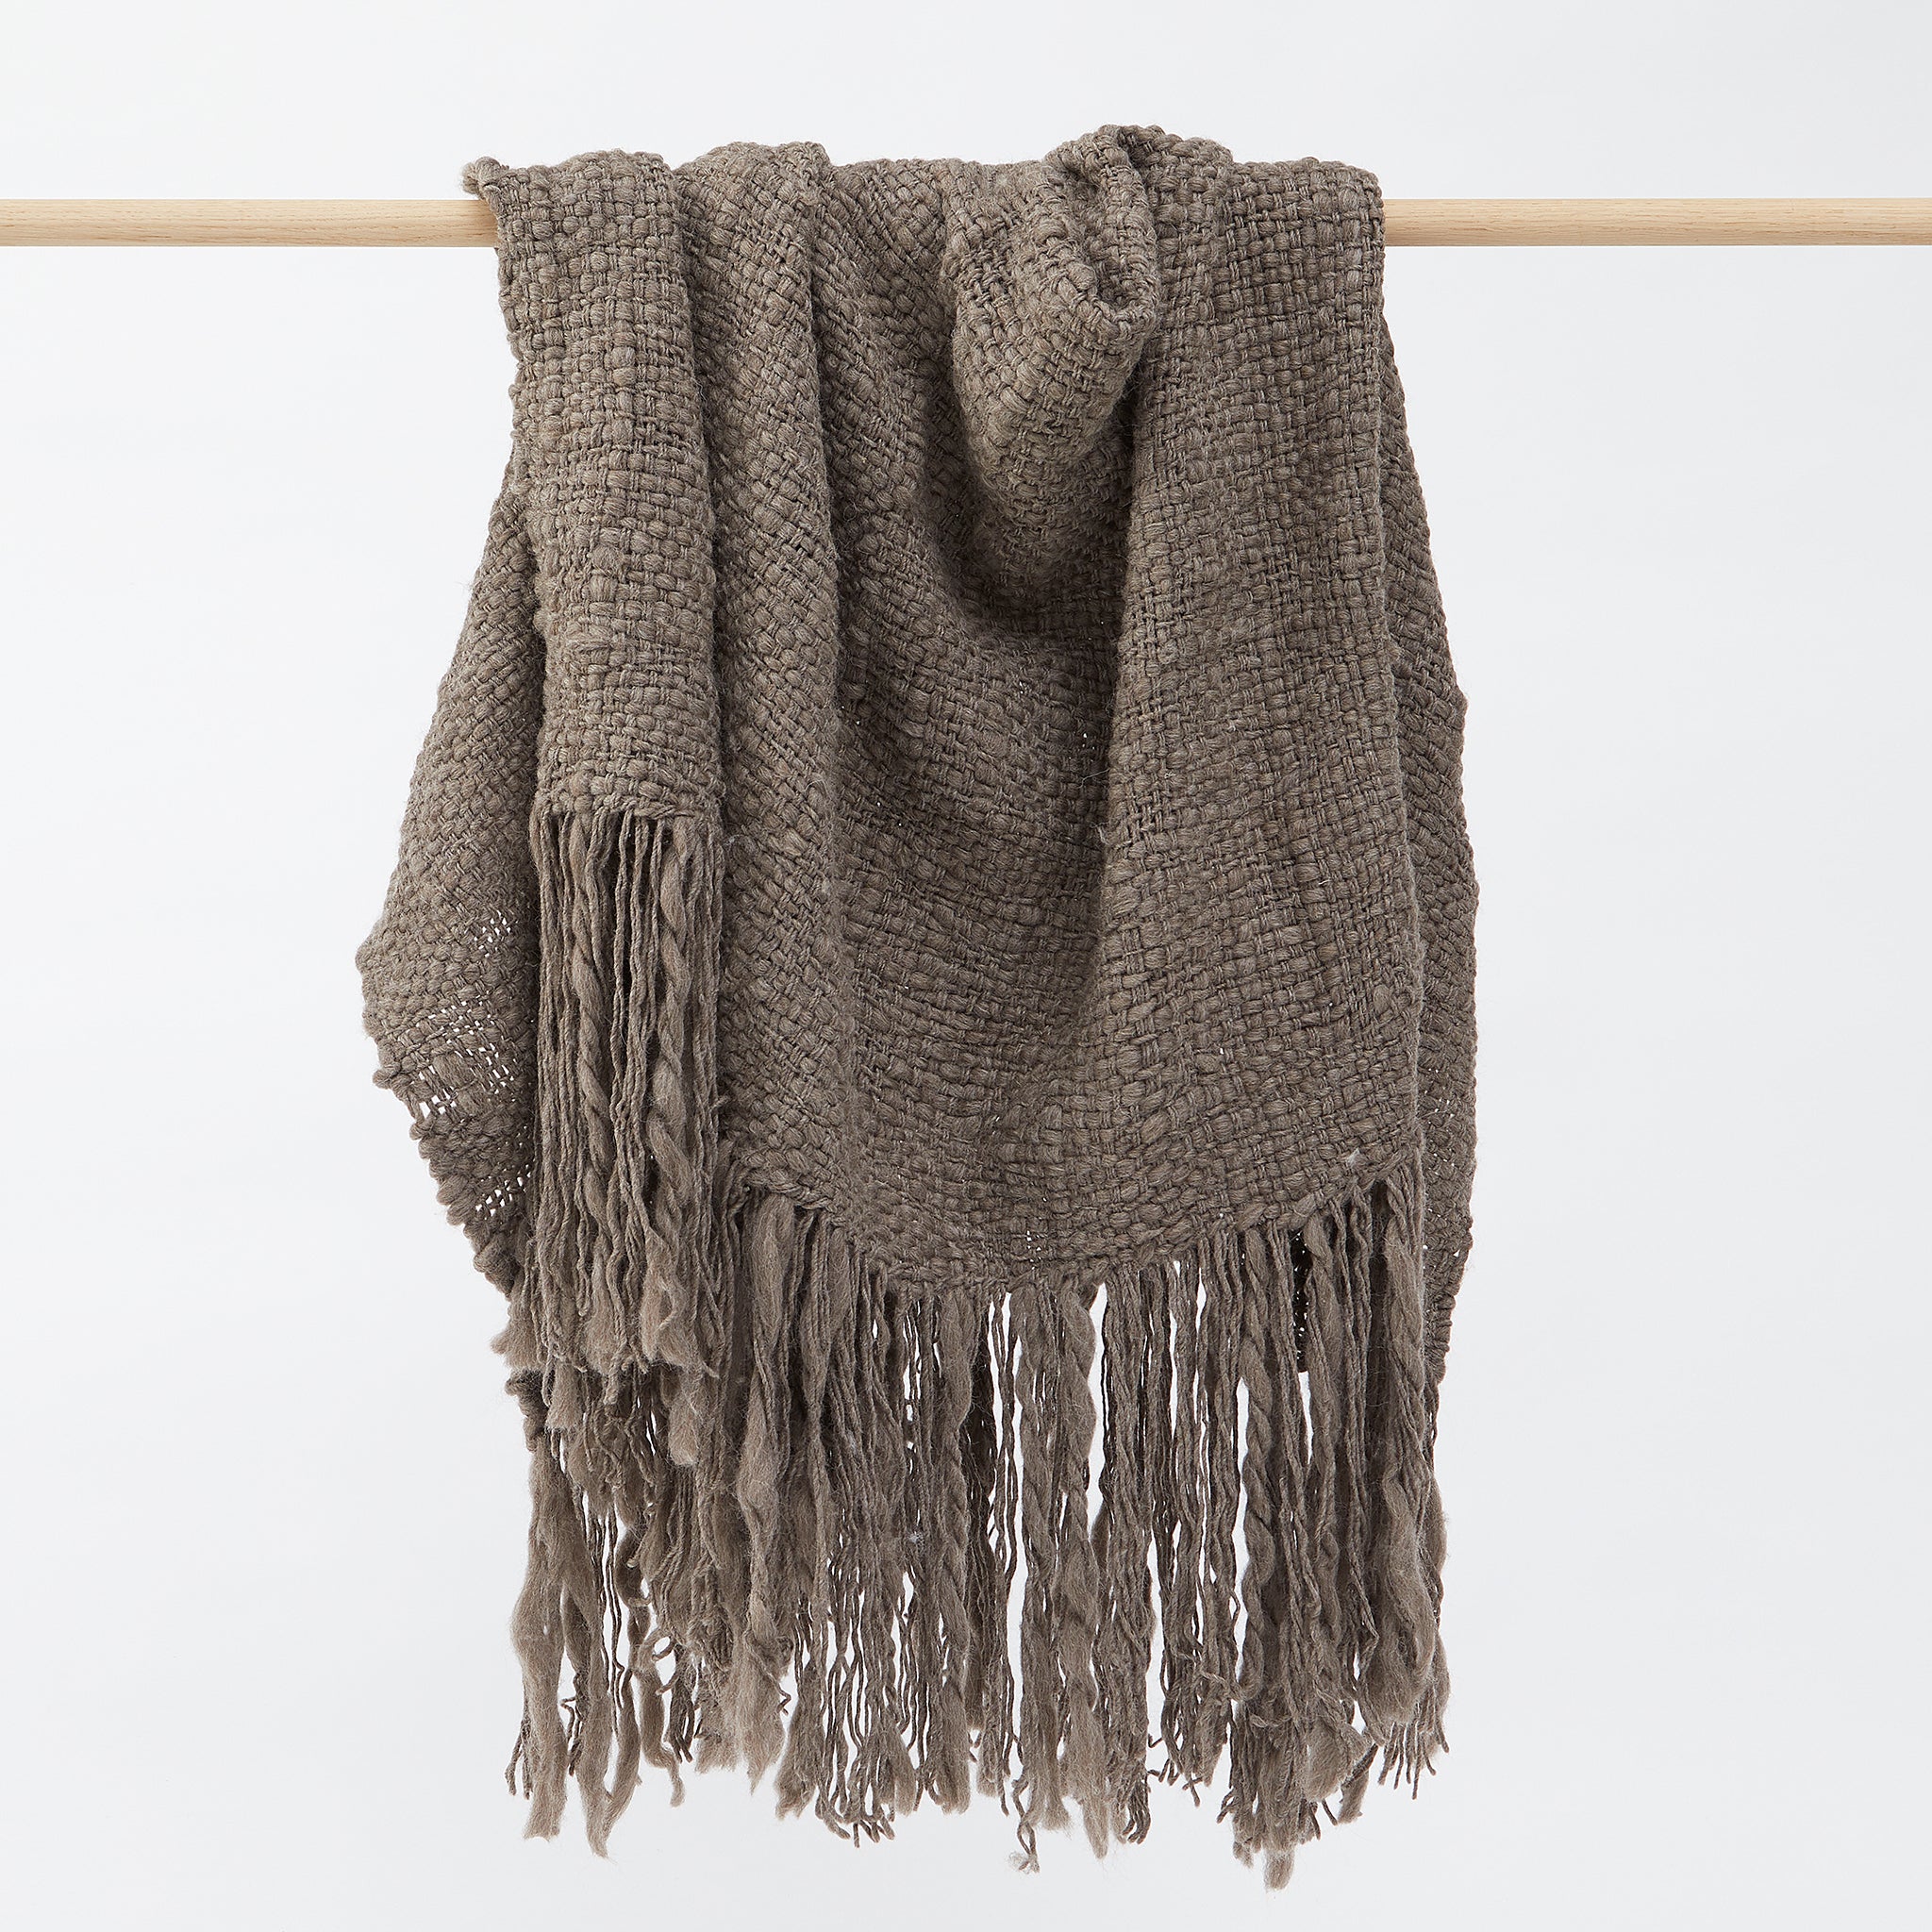 Handwoven, heavenly soft merino blanket Sueño made from the best, untreated wool of Patagonia. The irregular texture is a great eye-catcher in any room. These blankets are not only unique, but true works of art. Shop online now at By Native.